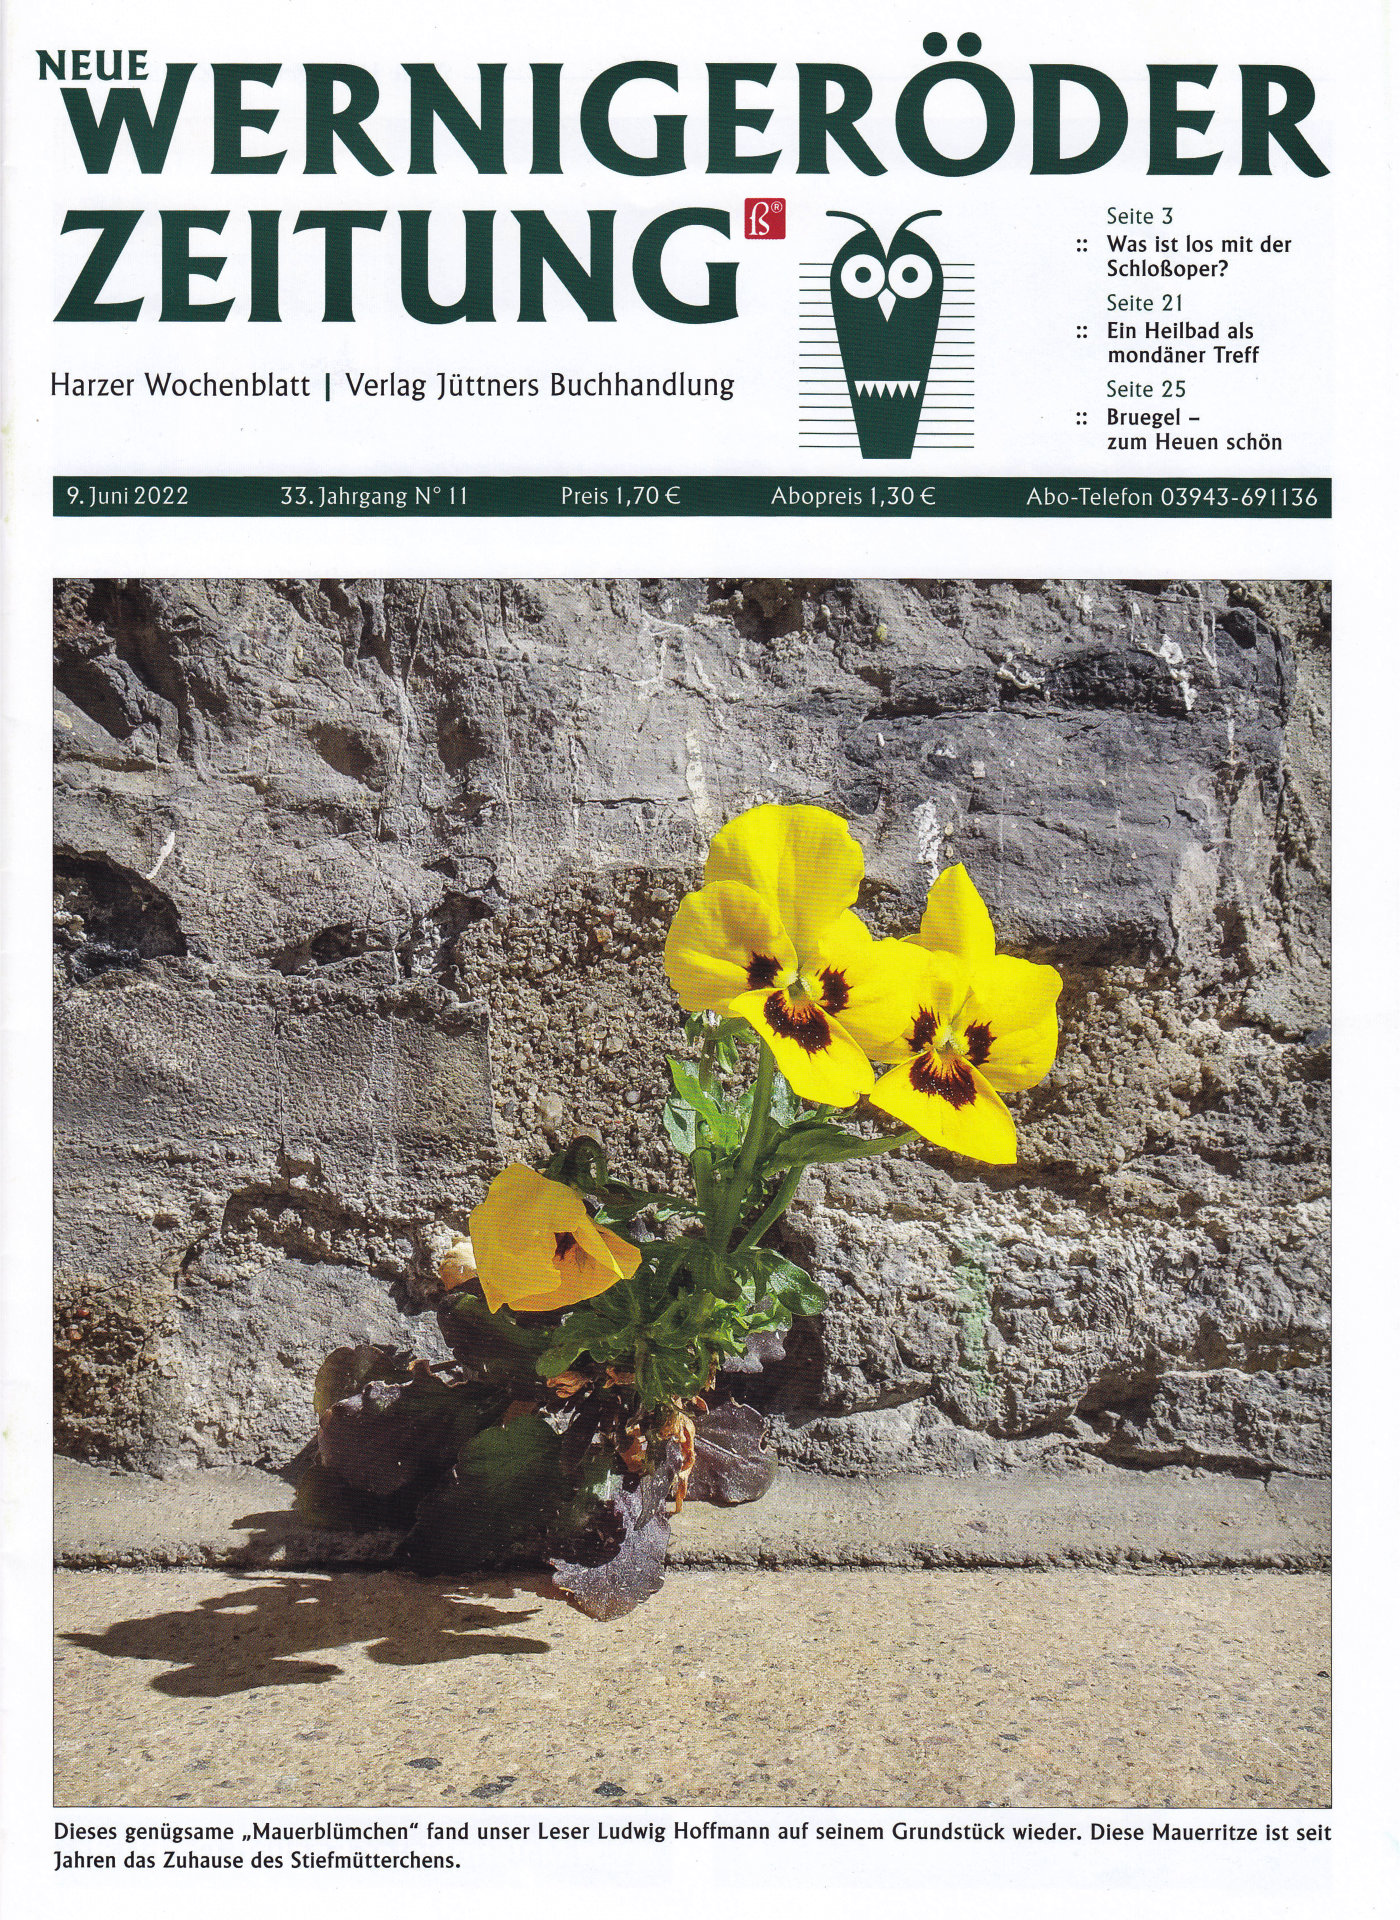 CPN cover #11 2022